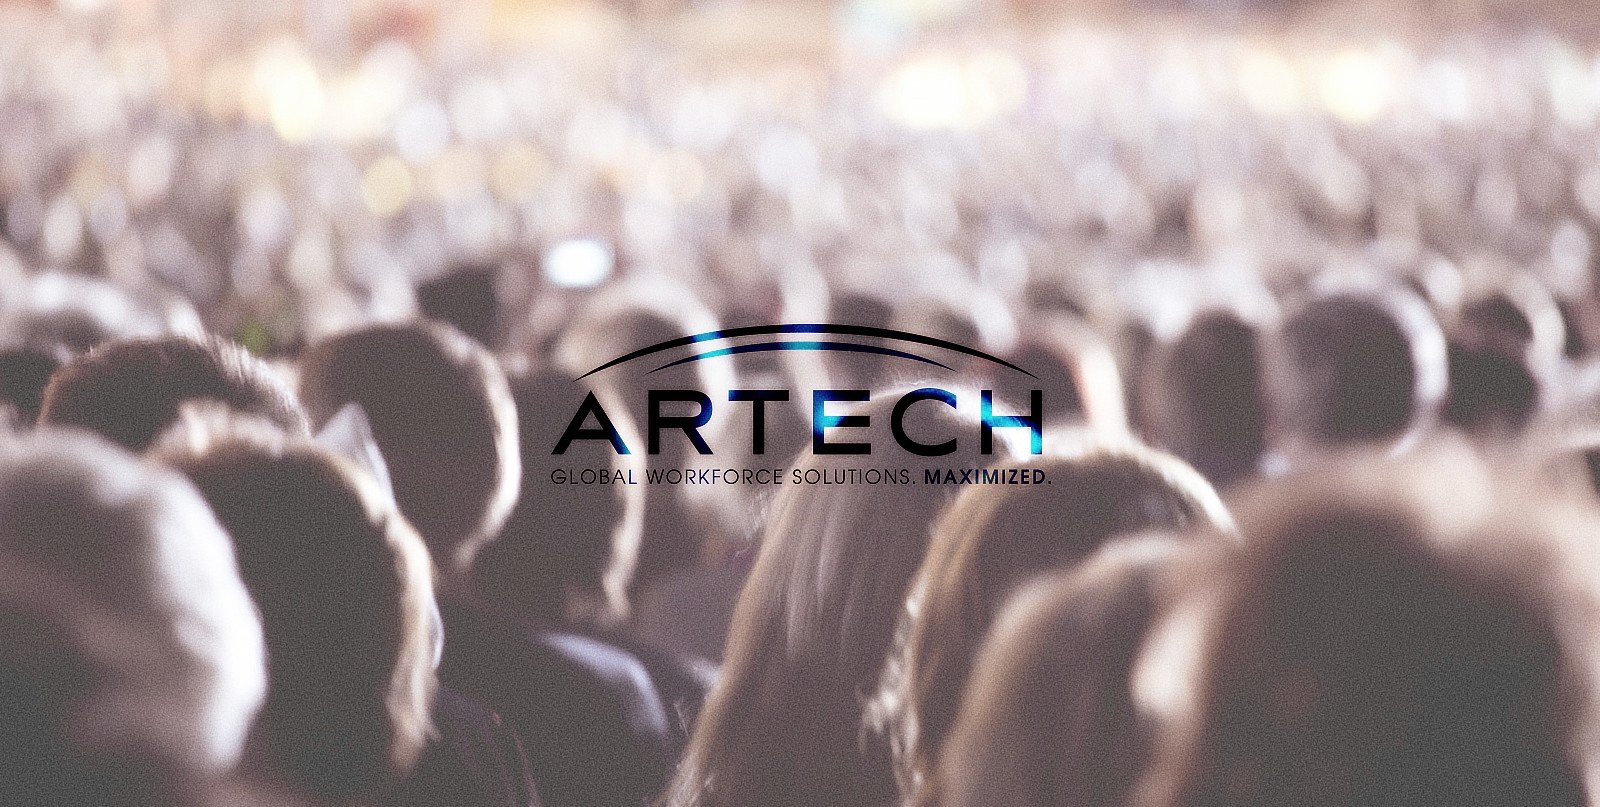 US staffing firm Artech discloses ransomware attack and data breach